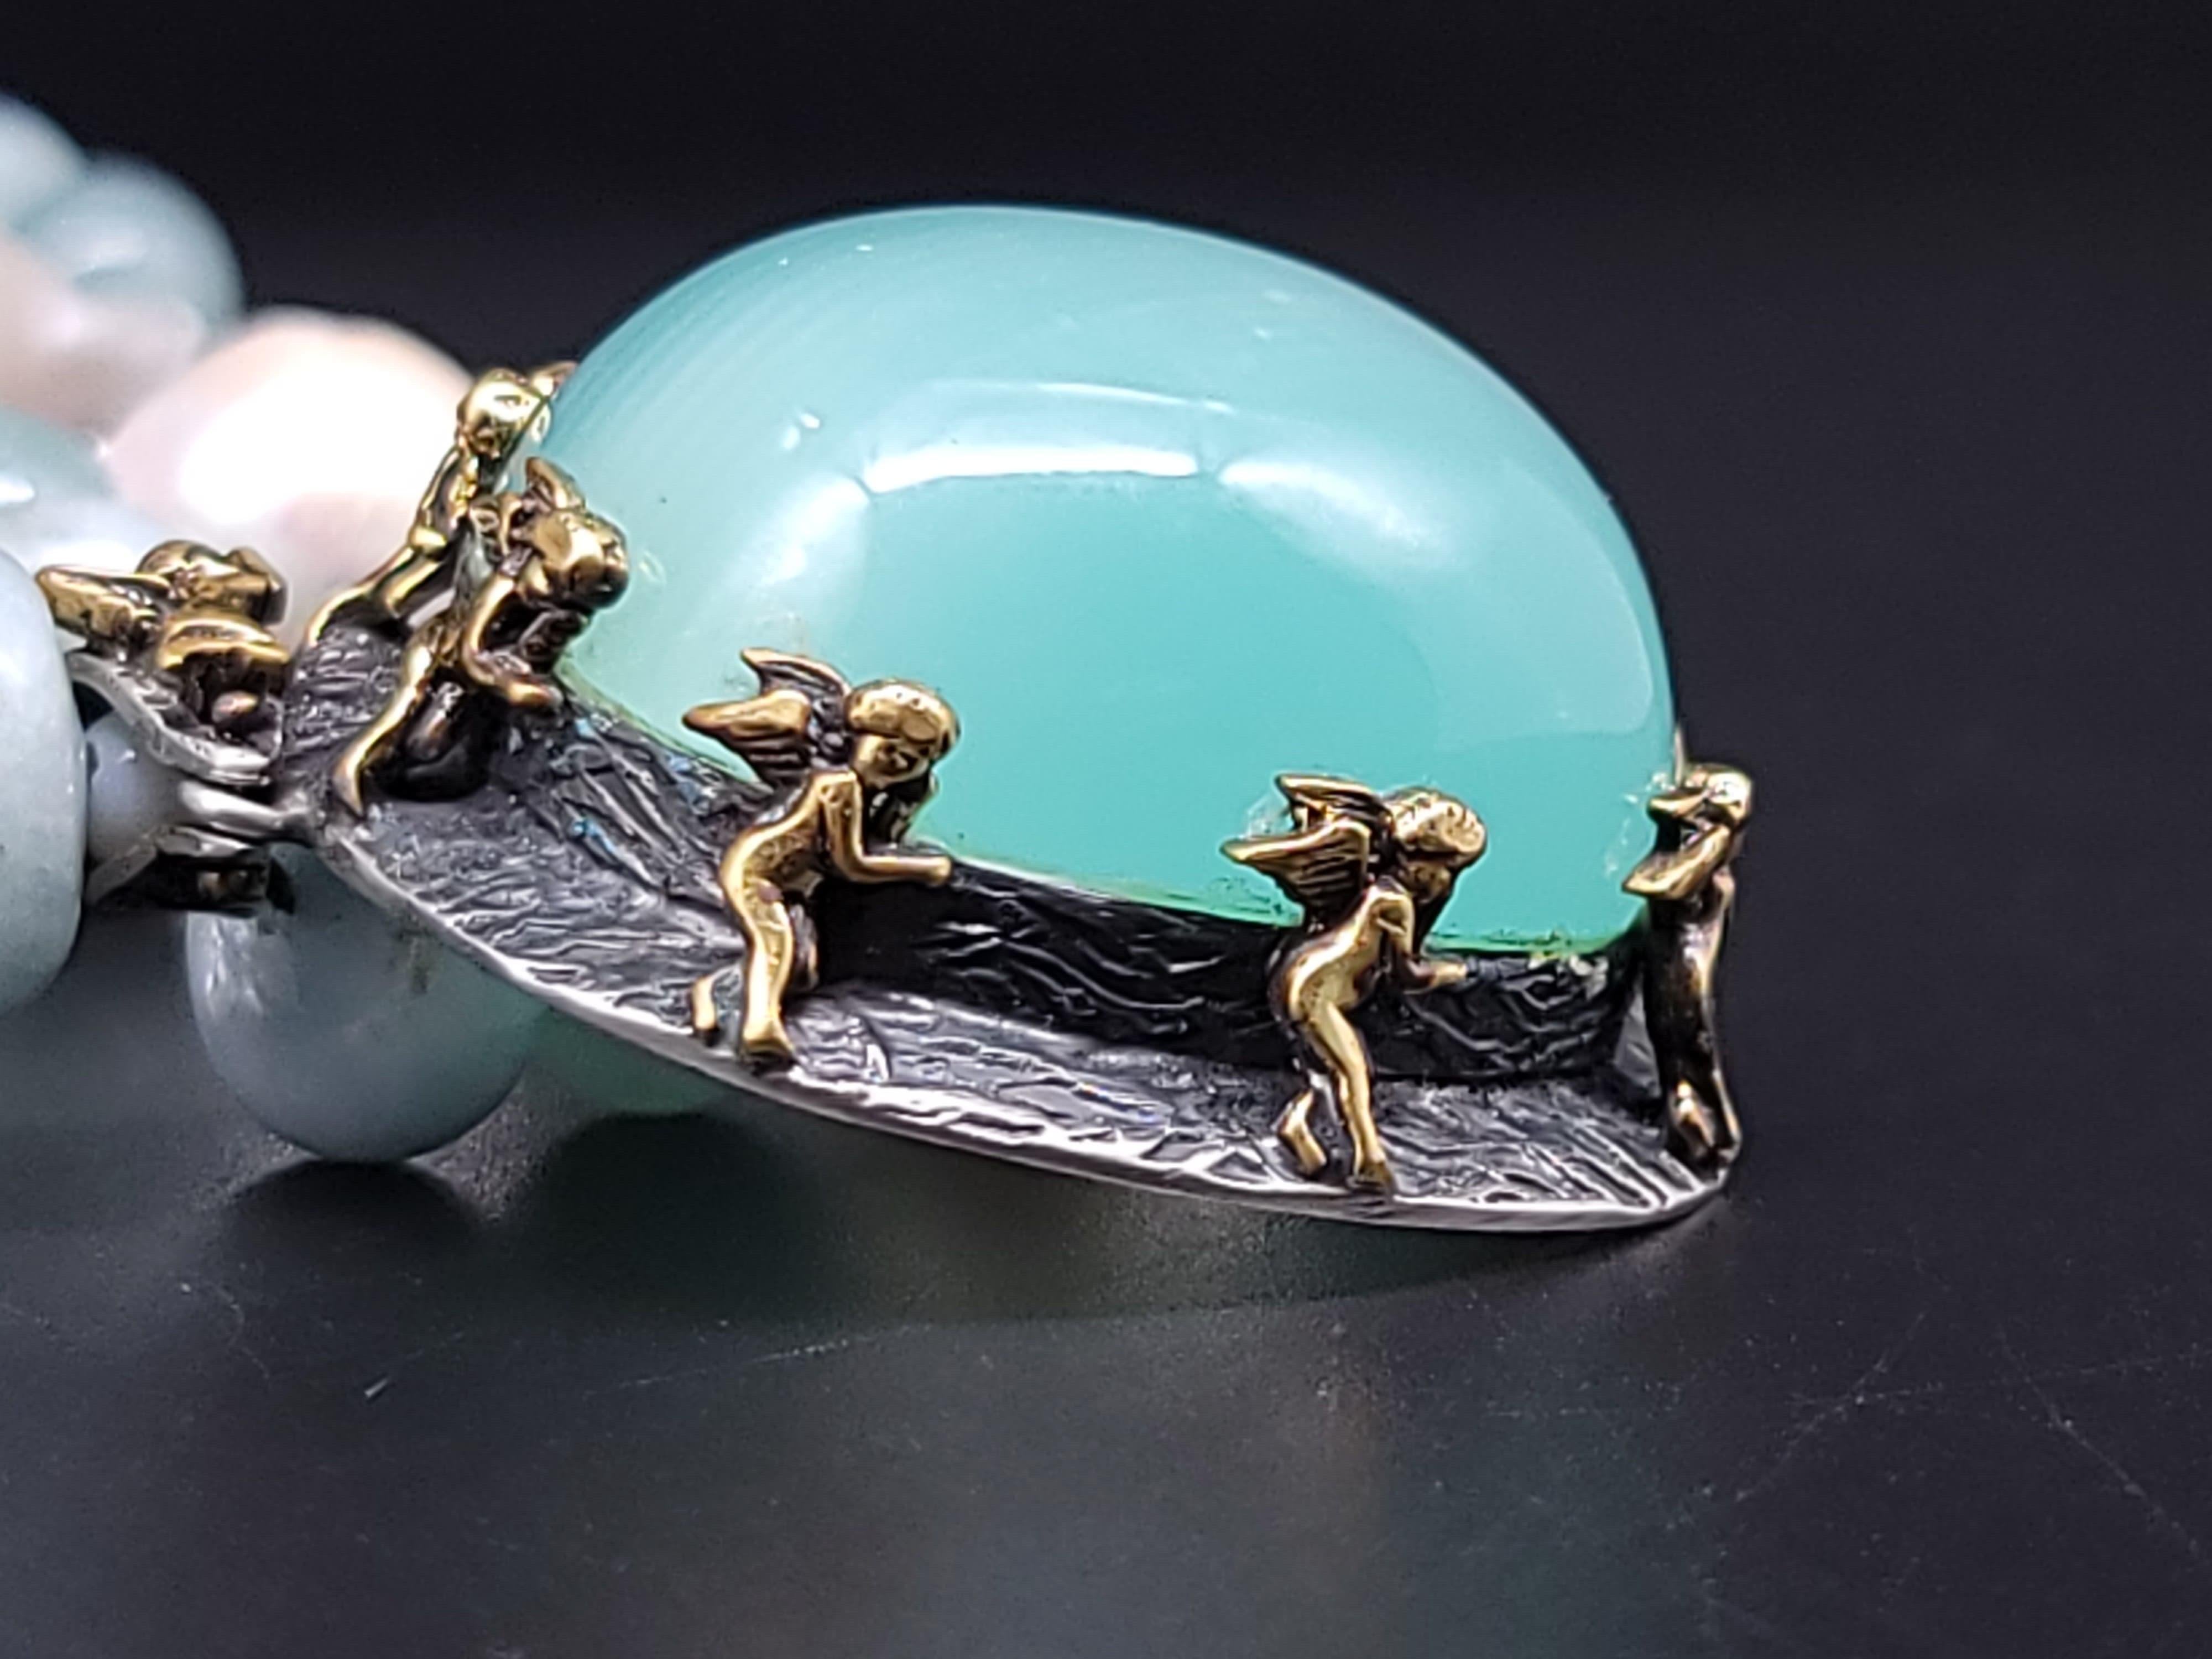 A.Jeschel Massive Aquamarine Pendant suspended from Baroque Pearl Necklace For Sale 1